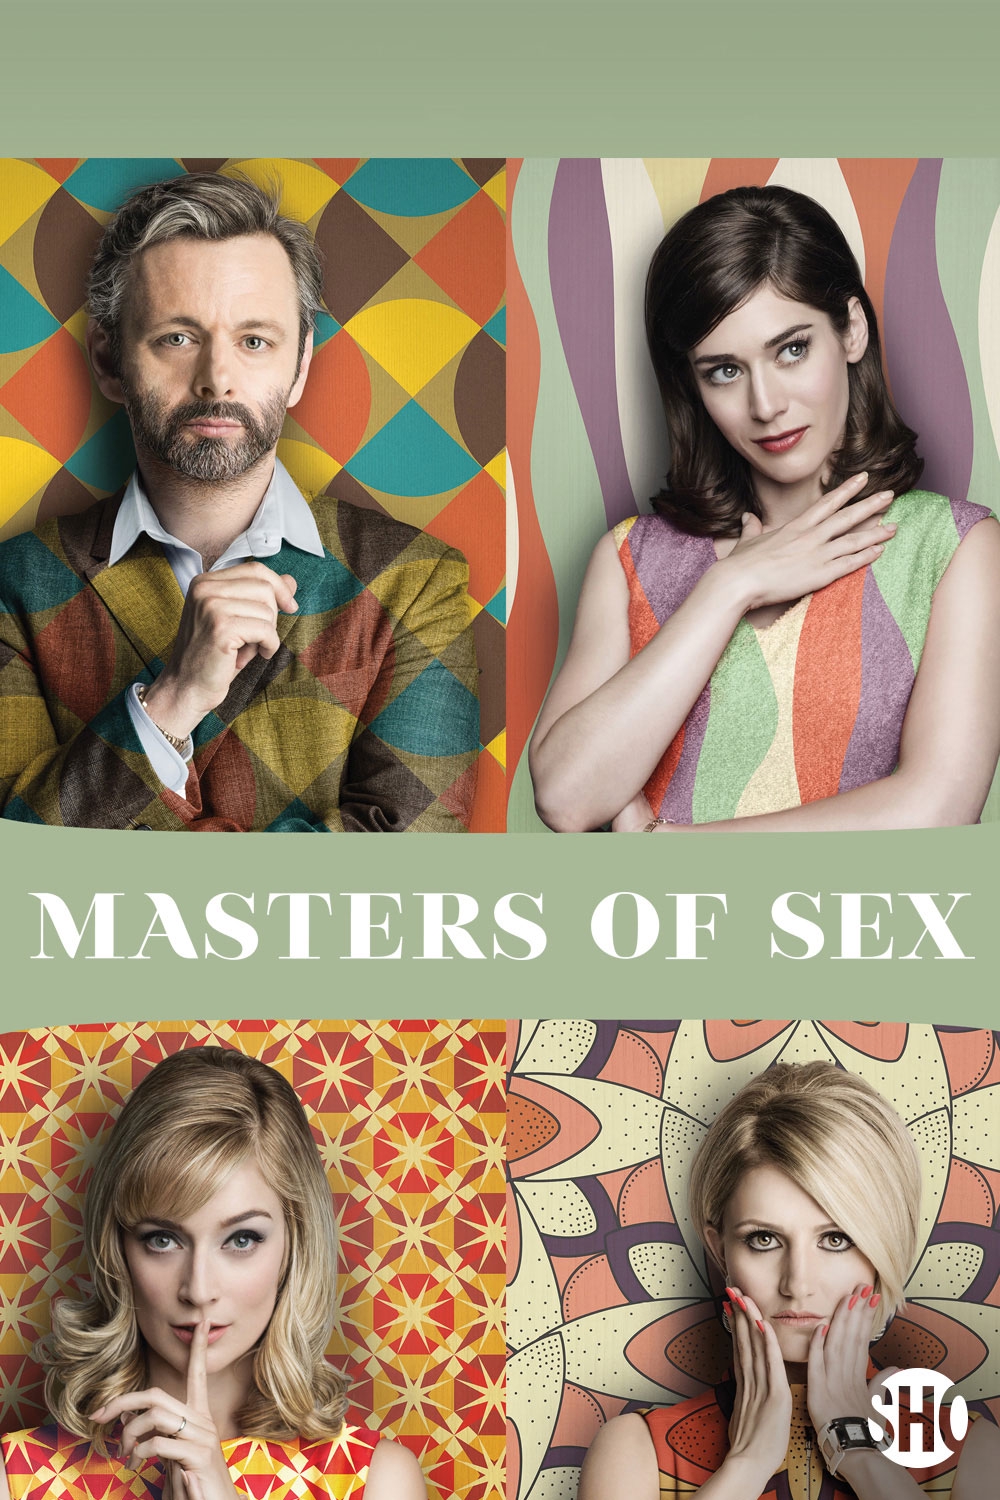 Watch the masters of sex online